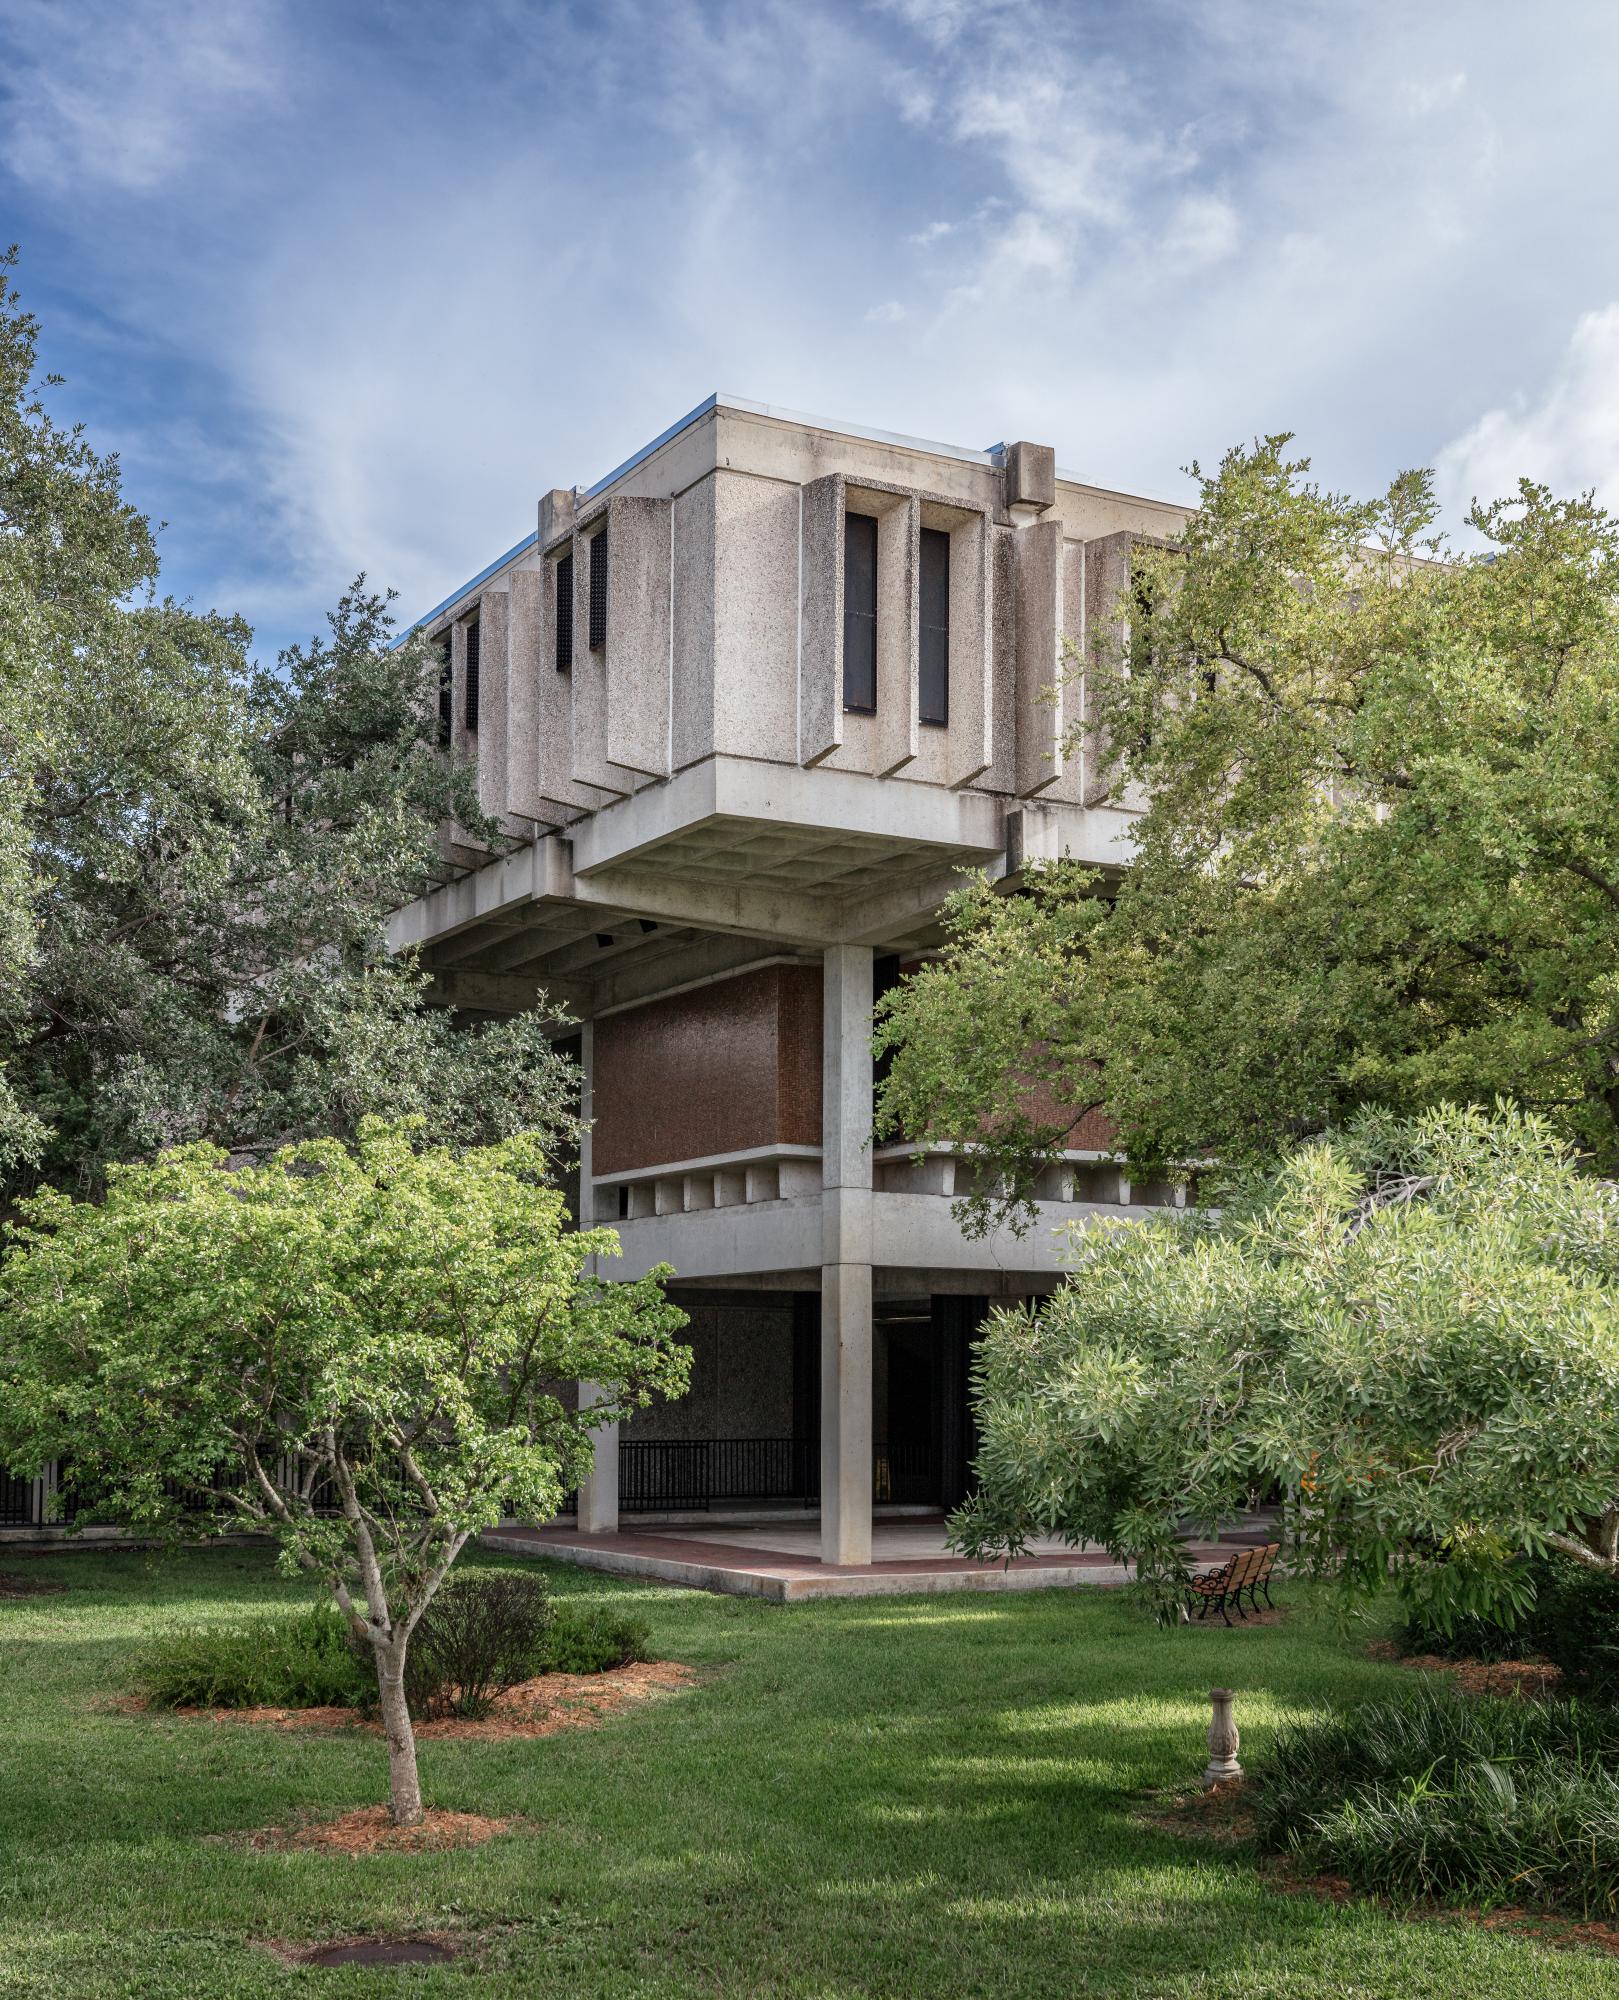 Connecting Concrete: Modernist Architecture from Havana to Miami - Miami Dade College, South Campus, Building 3, 1967